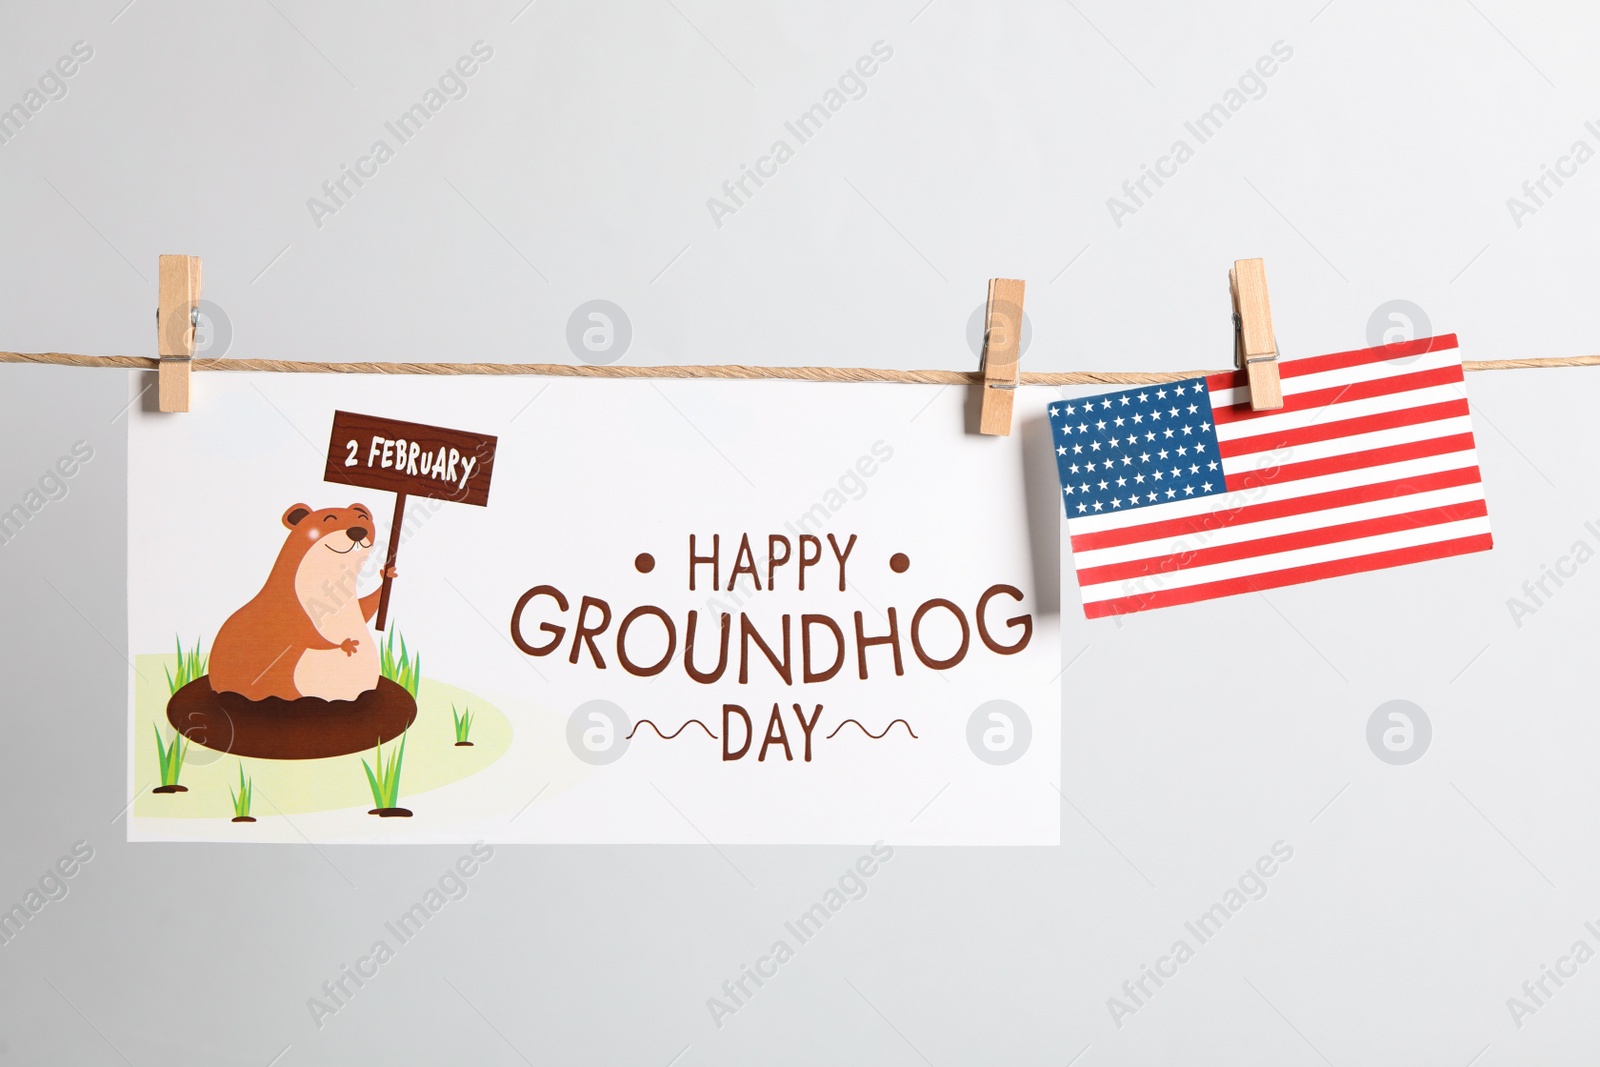 Photo of Happy Groundhog Day greeting card and American flag hanging on light background